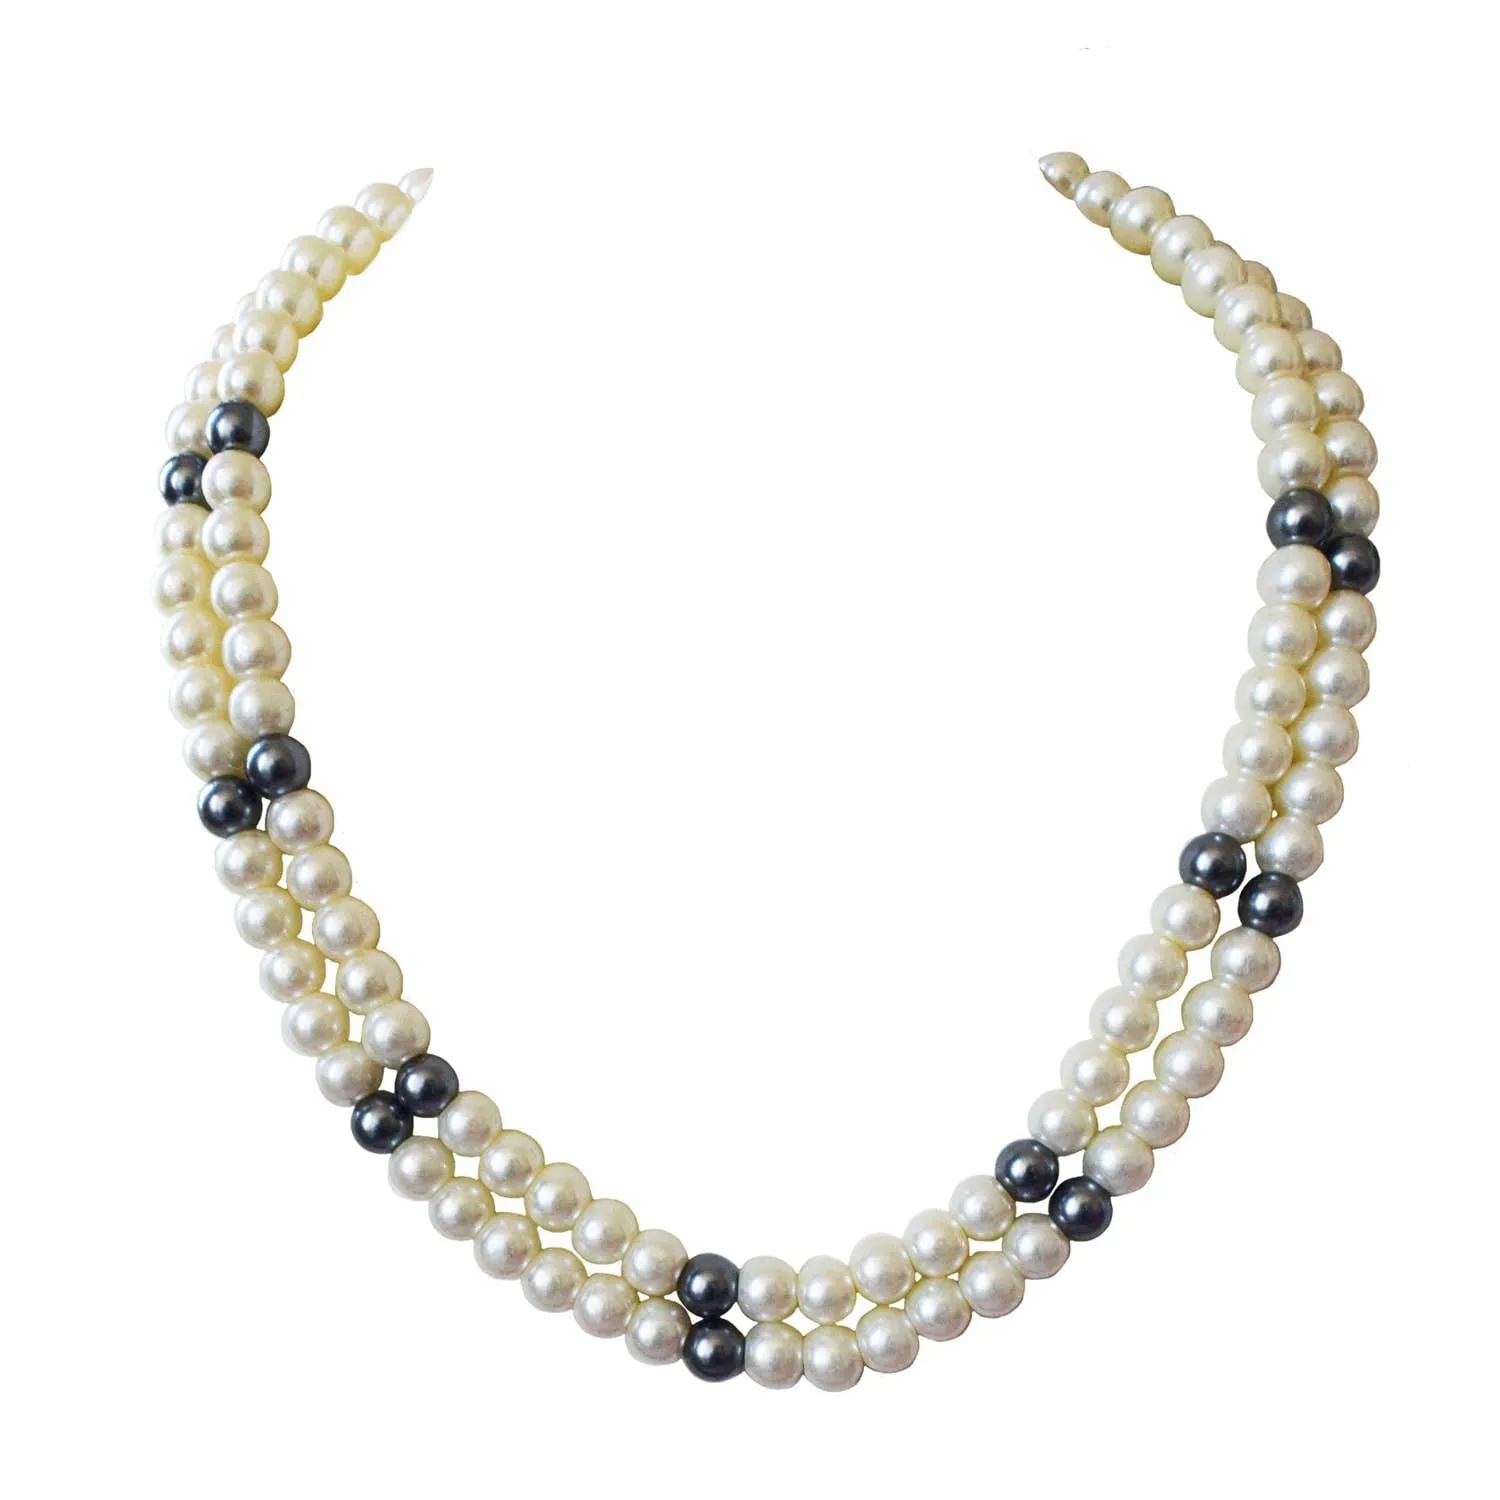 2 Line Heavy Looking White, Grey Shell Pearl Necklace for Women